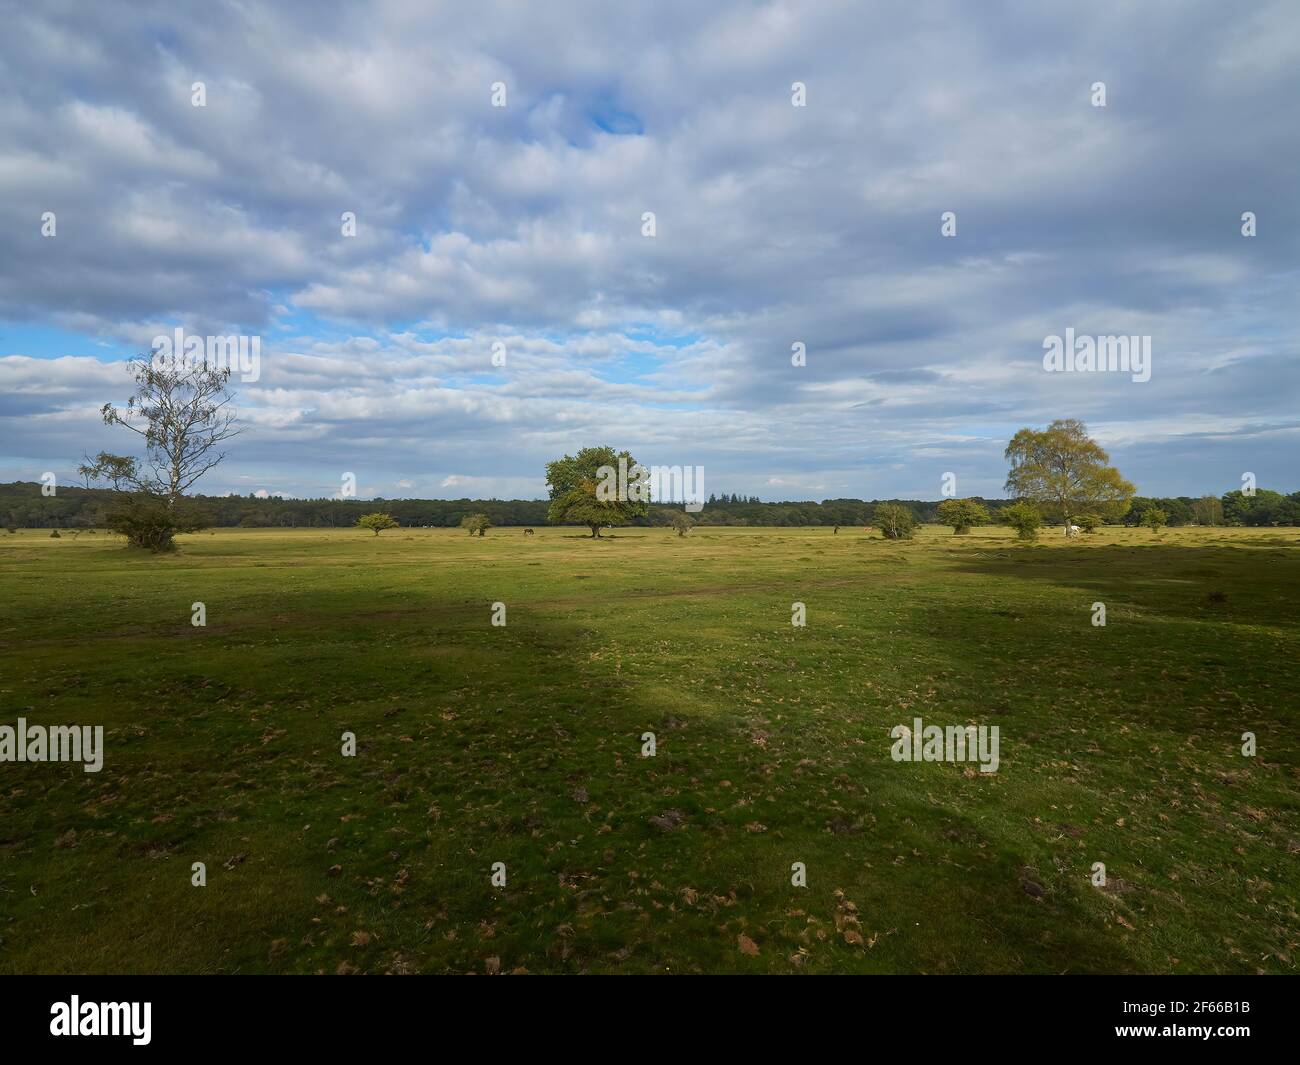 An expansive view of a field with three symmetrical, mature trees, autumn leaves and cloud shadows from the bright sunlight. Overhead hangs a huge sky Stock Photo